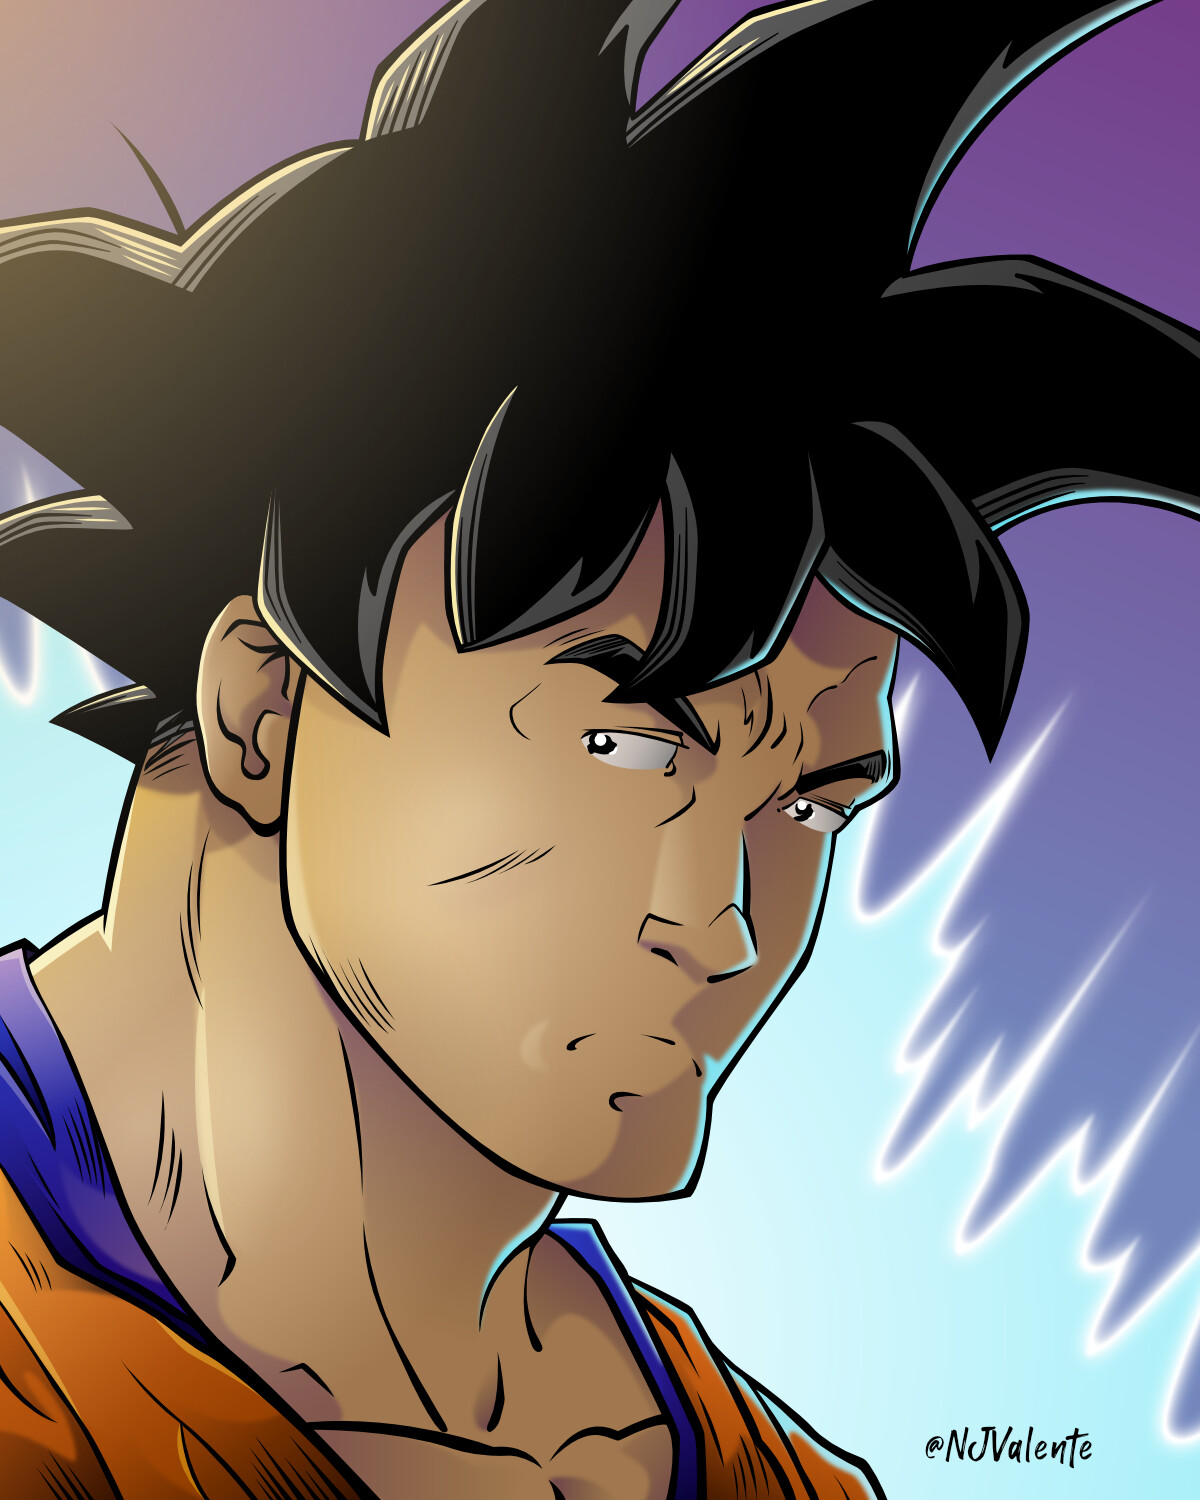 Goku vector art done in Affinity Designer, live on Twitch. 